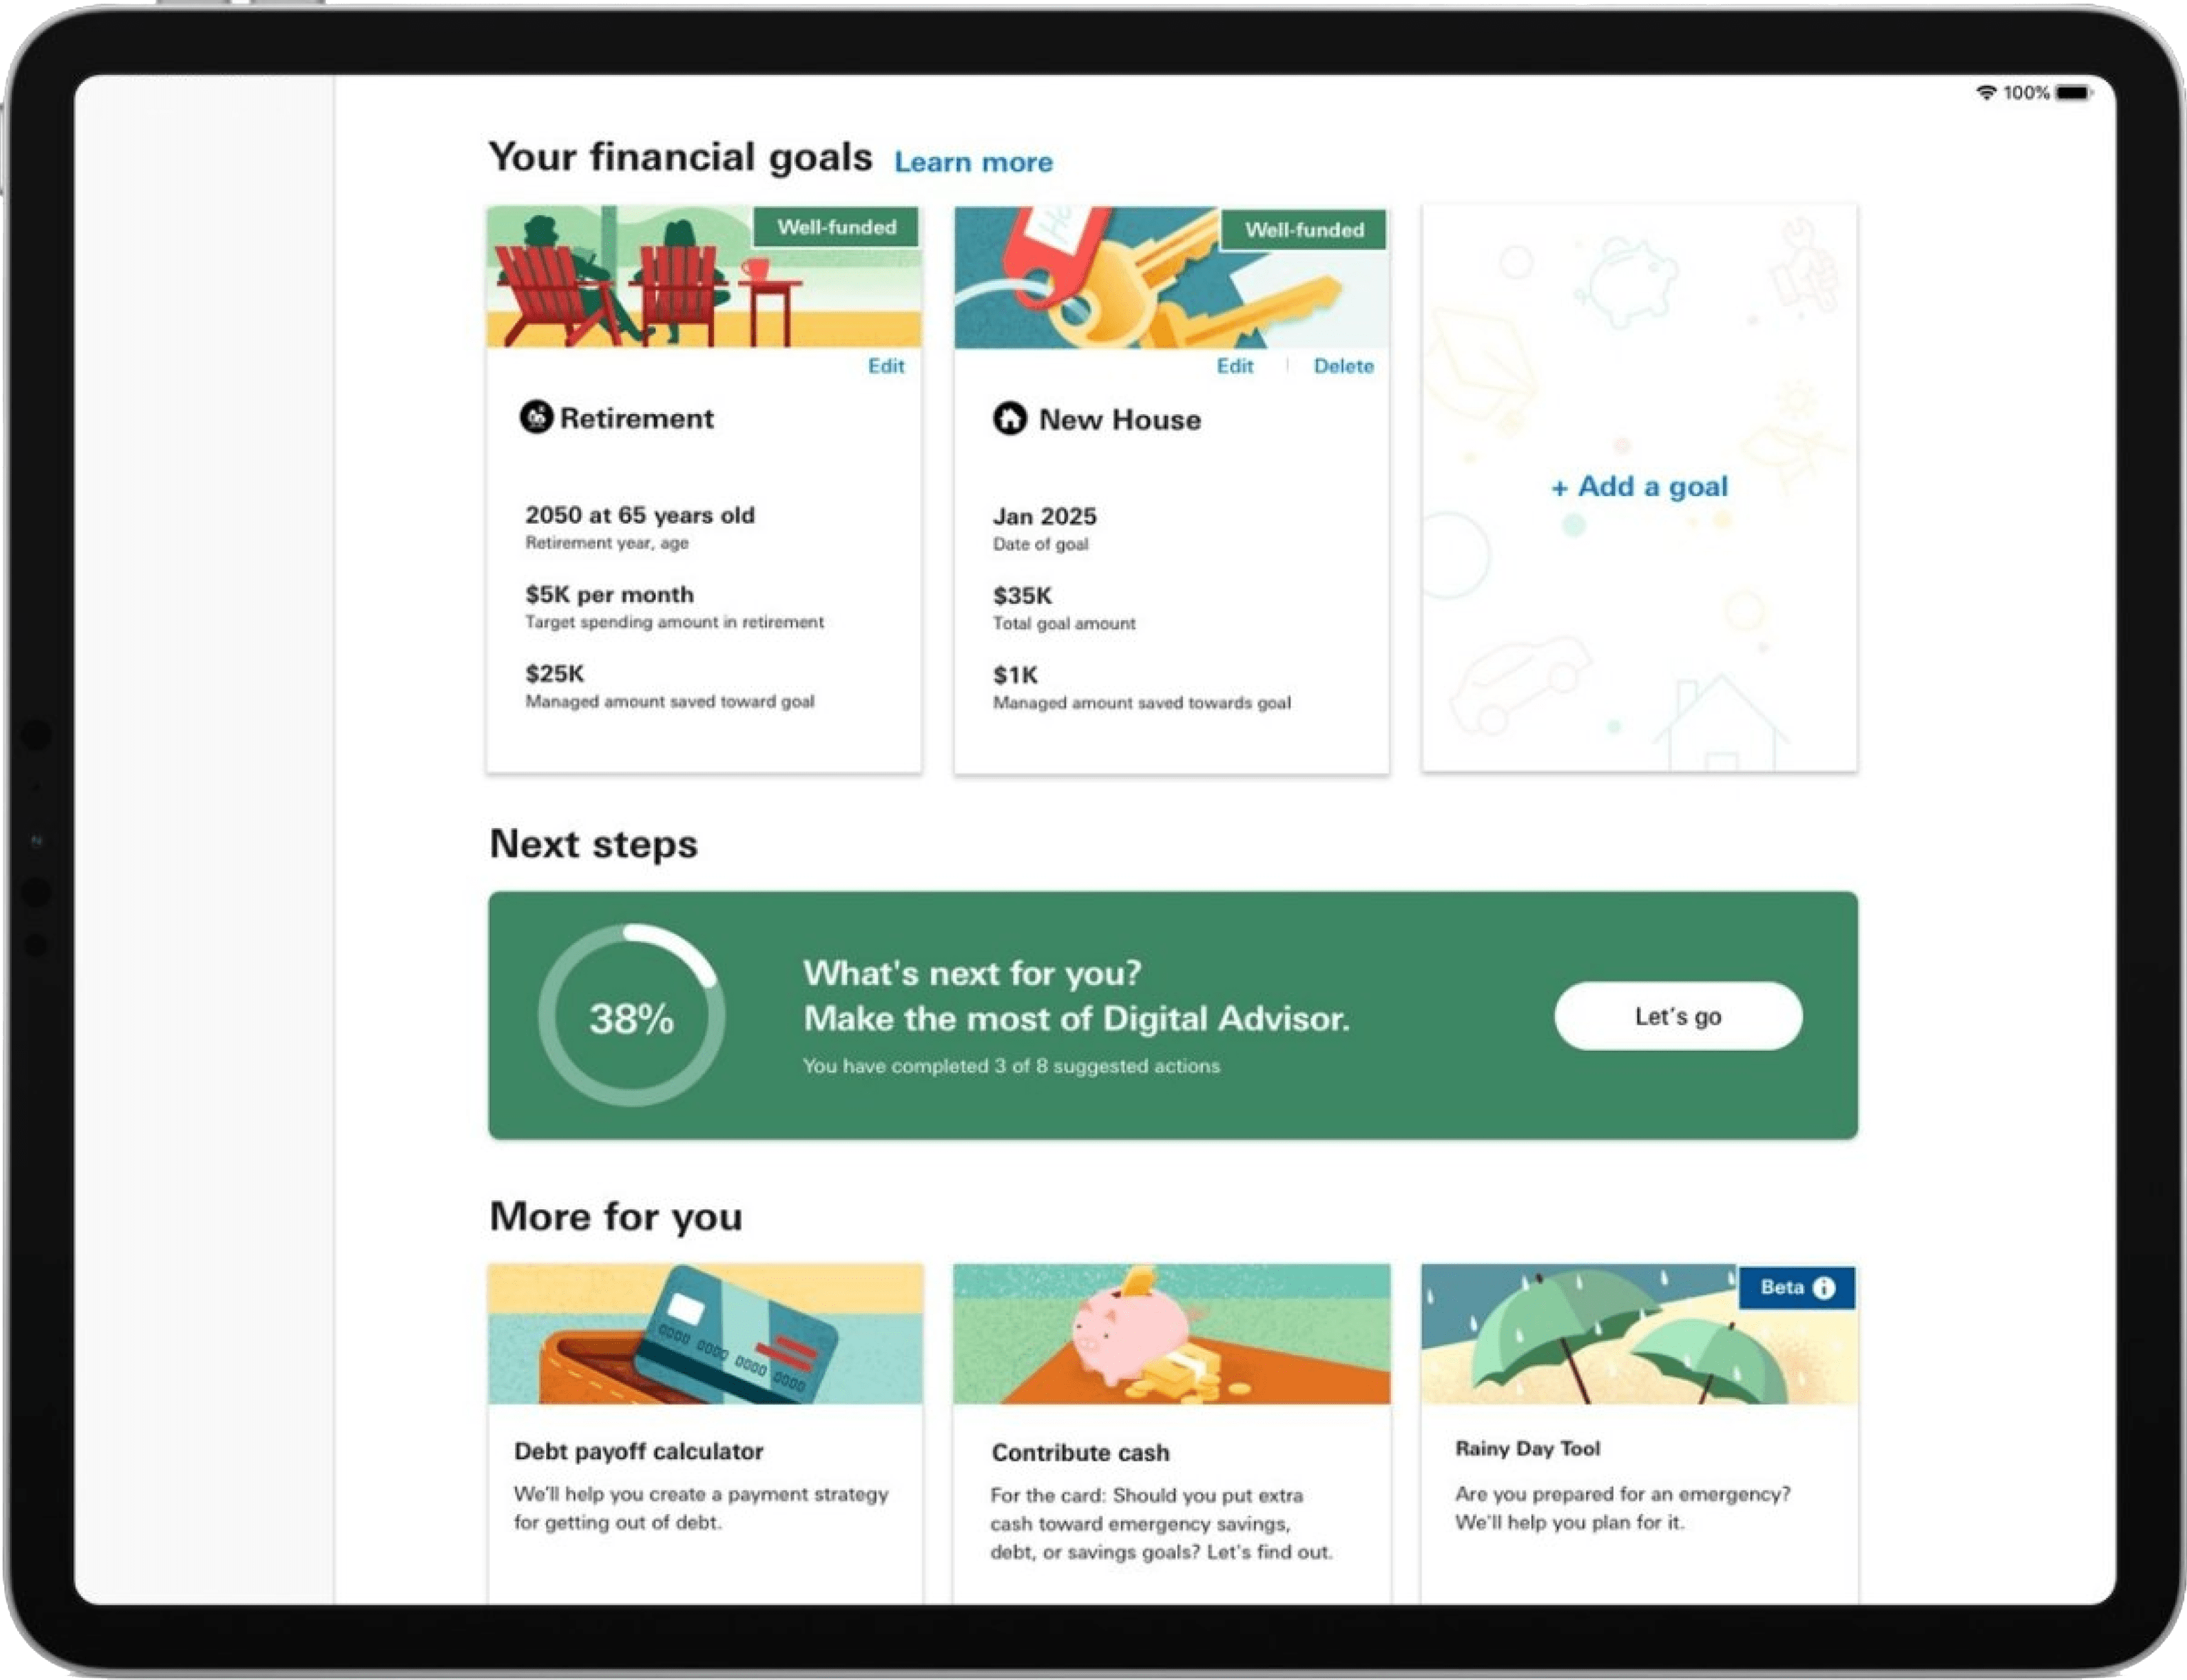 Webpage screenshot with header: Your financial goals. This page shows different goals you can set with Digital Advisor—like saving for retirement or a new house. And it calls out the next steps to take to help you reach those goals.